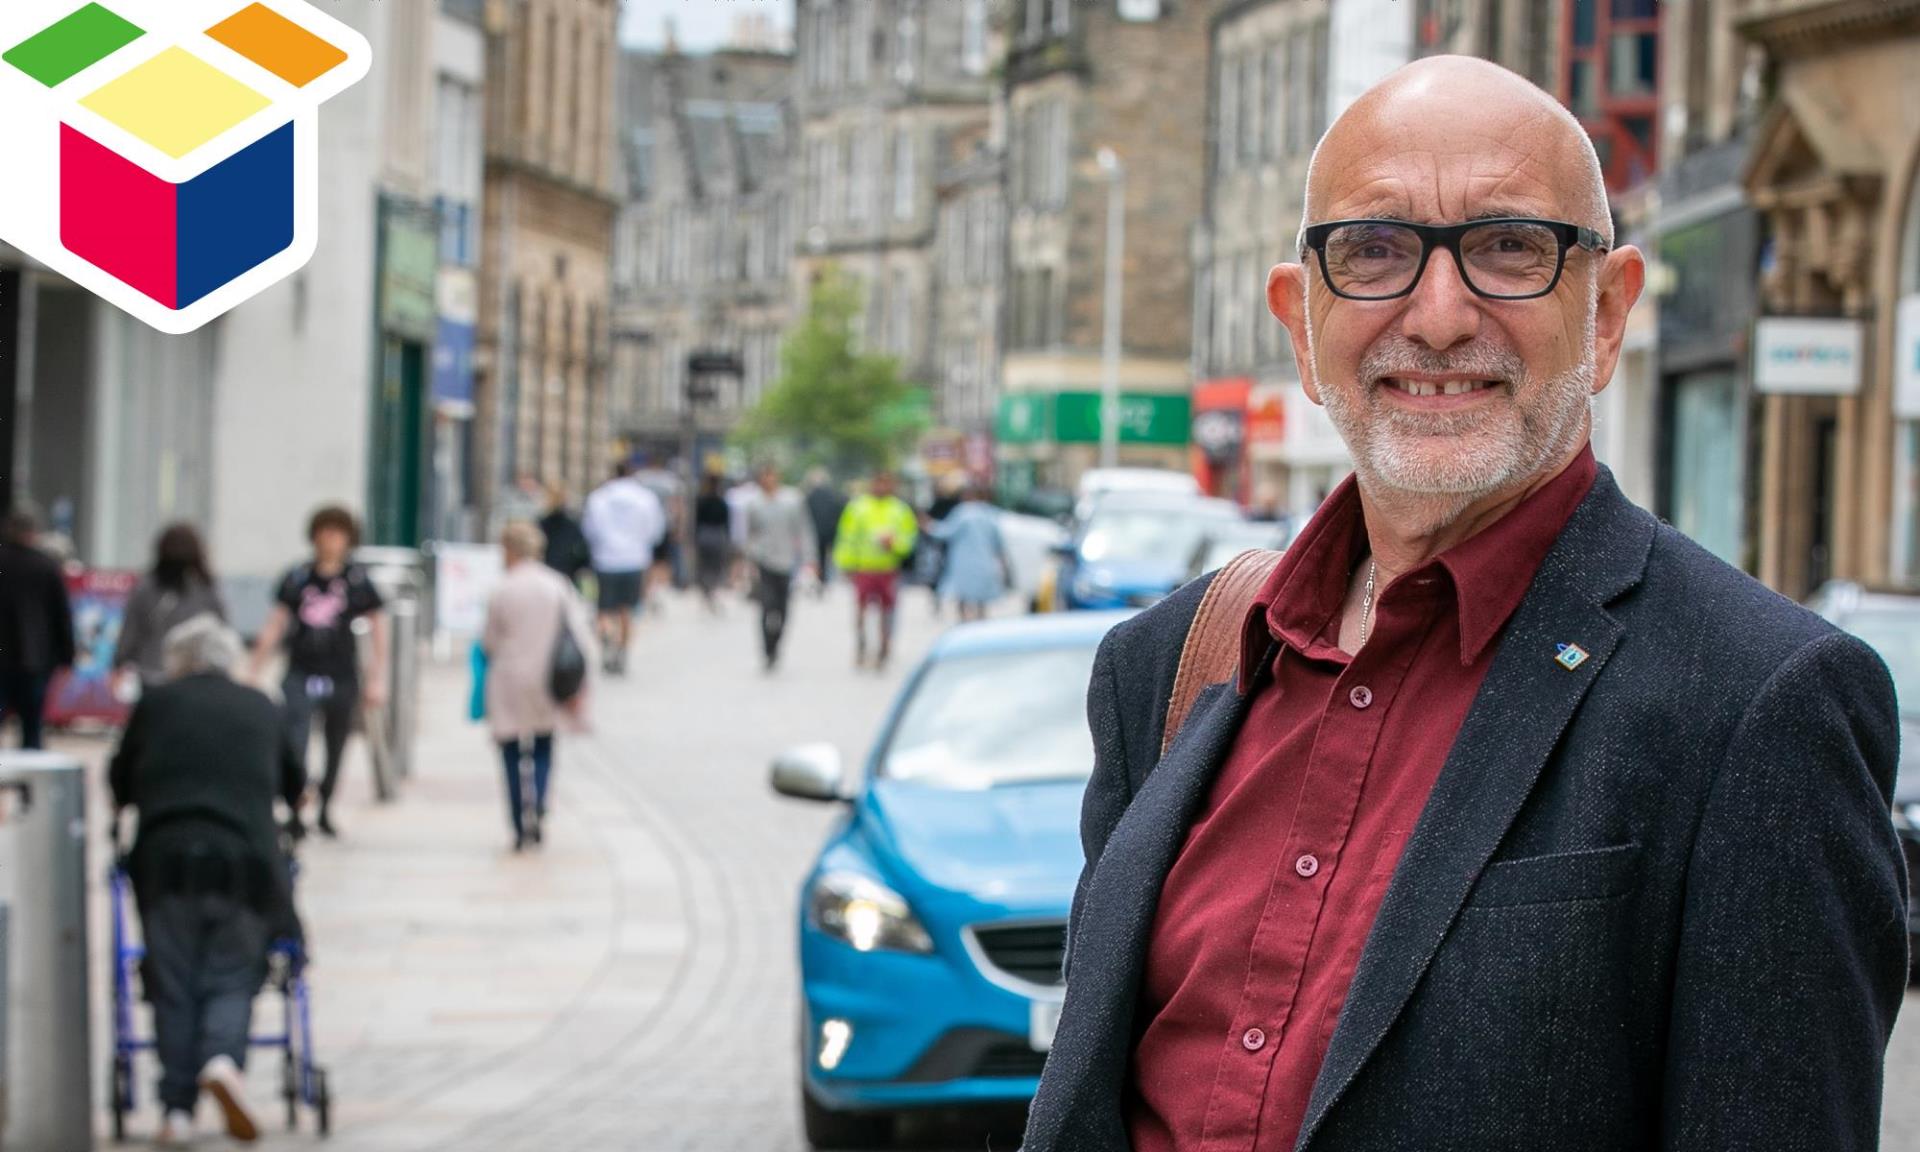 Danny Cepok sees a bright future for Kirkcaldy High Street - but it has to change.